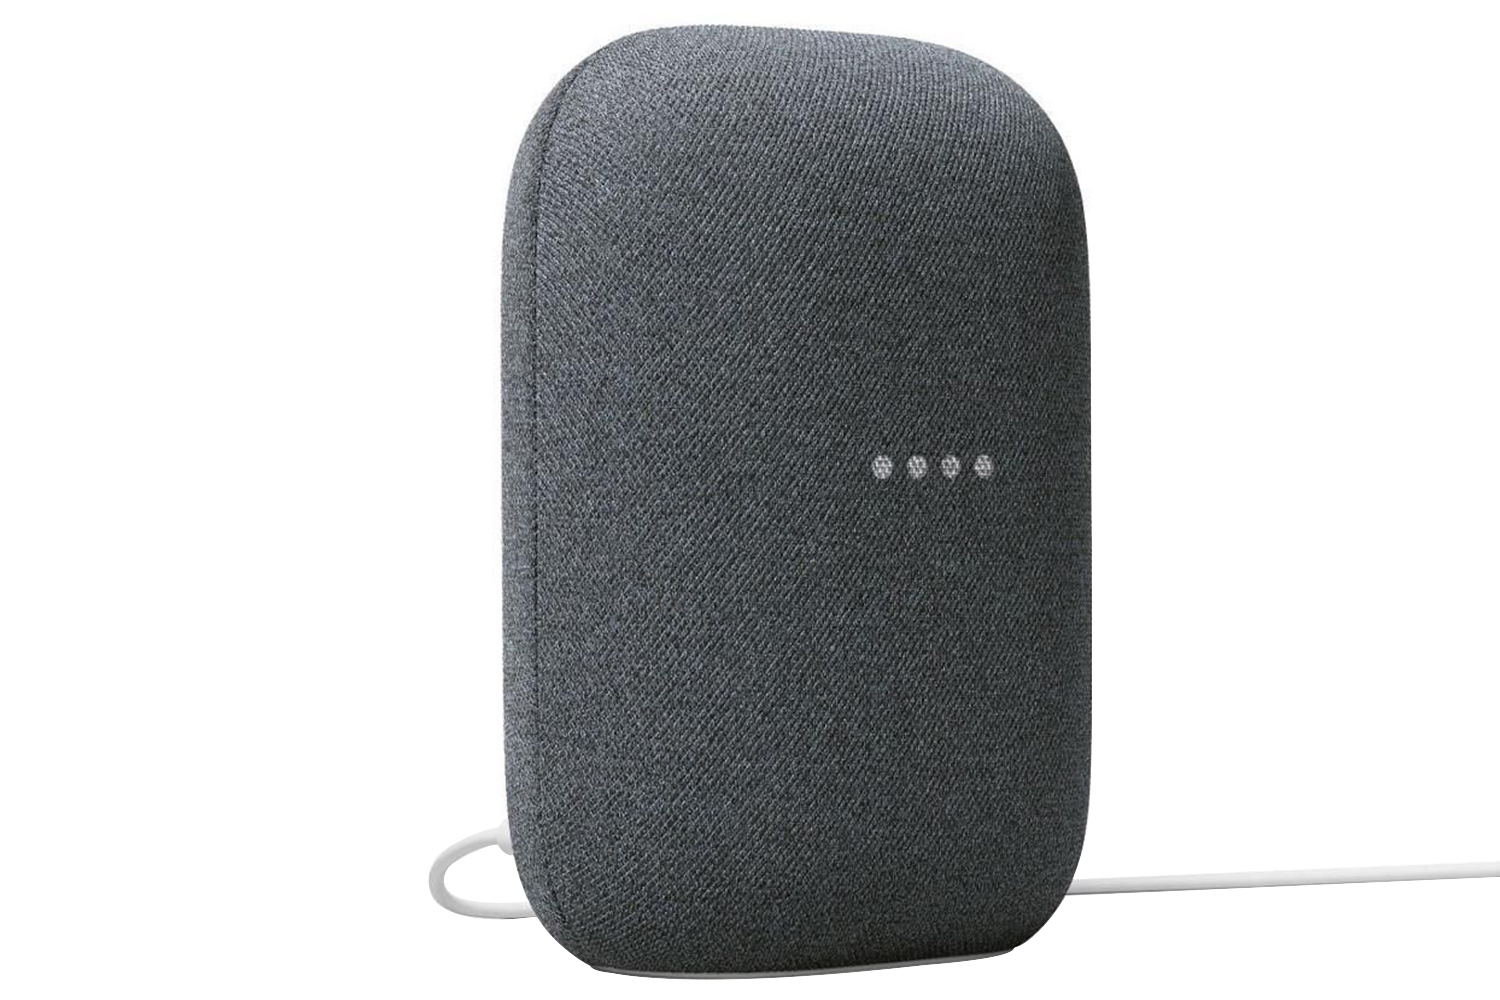 does google nest router have a speaker